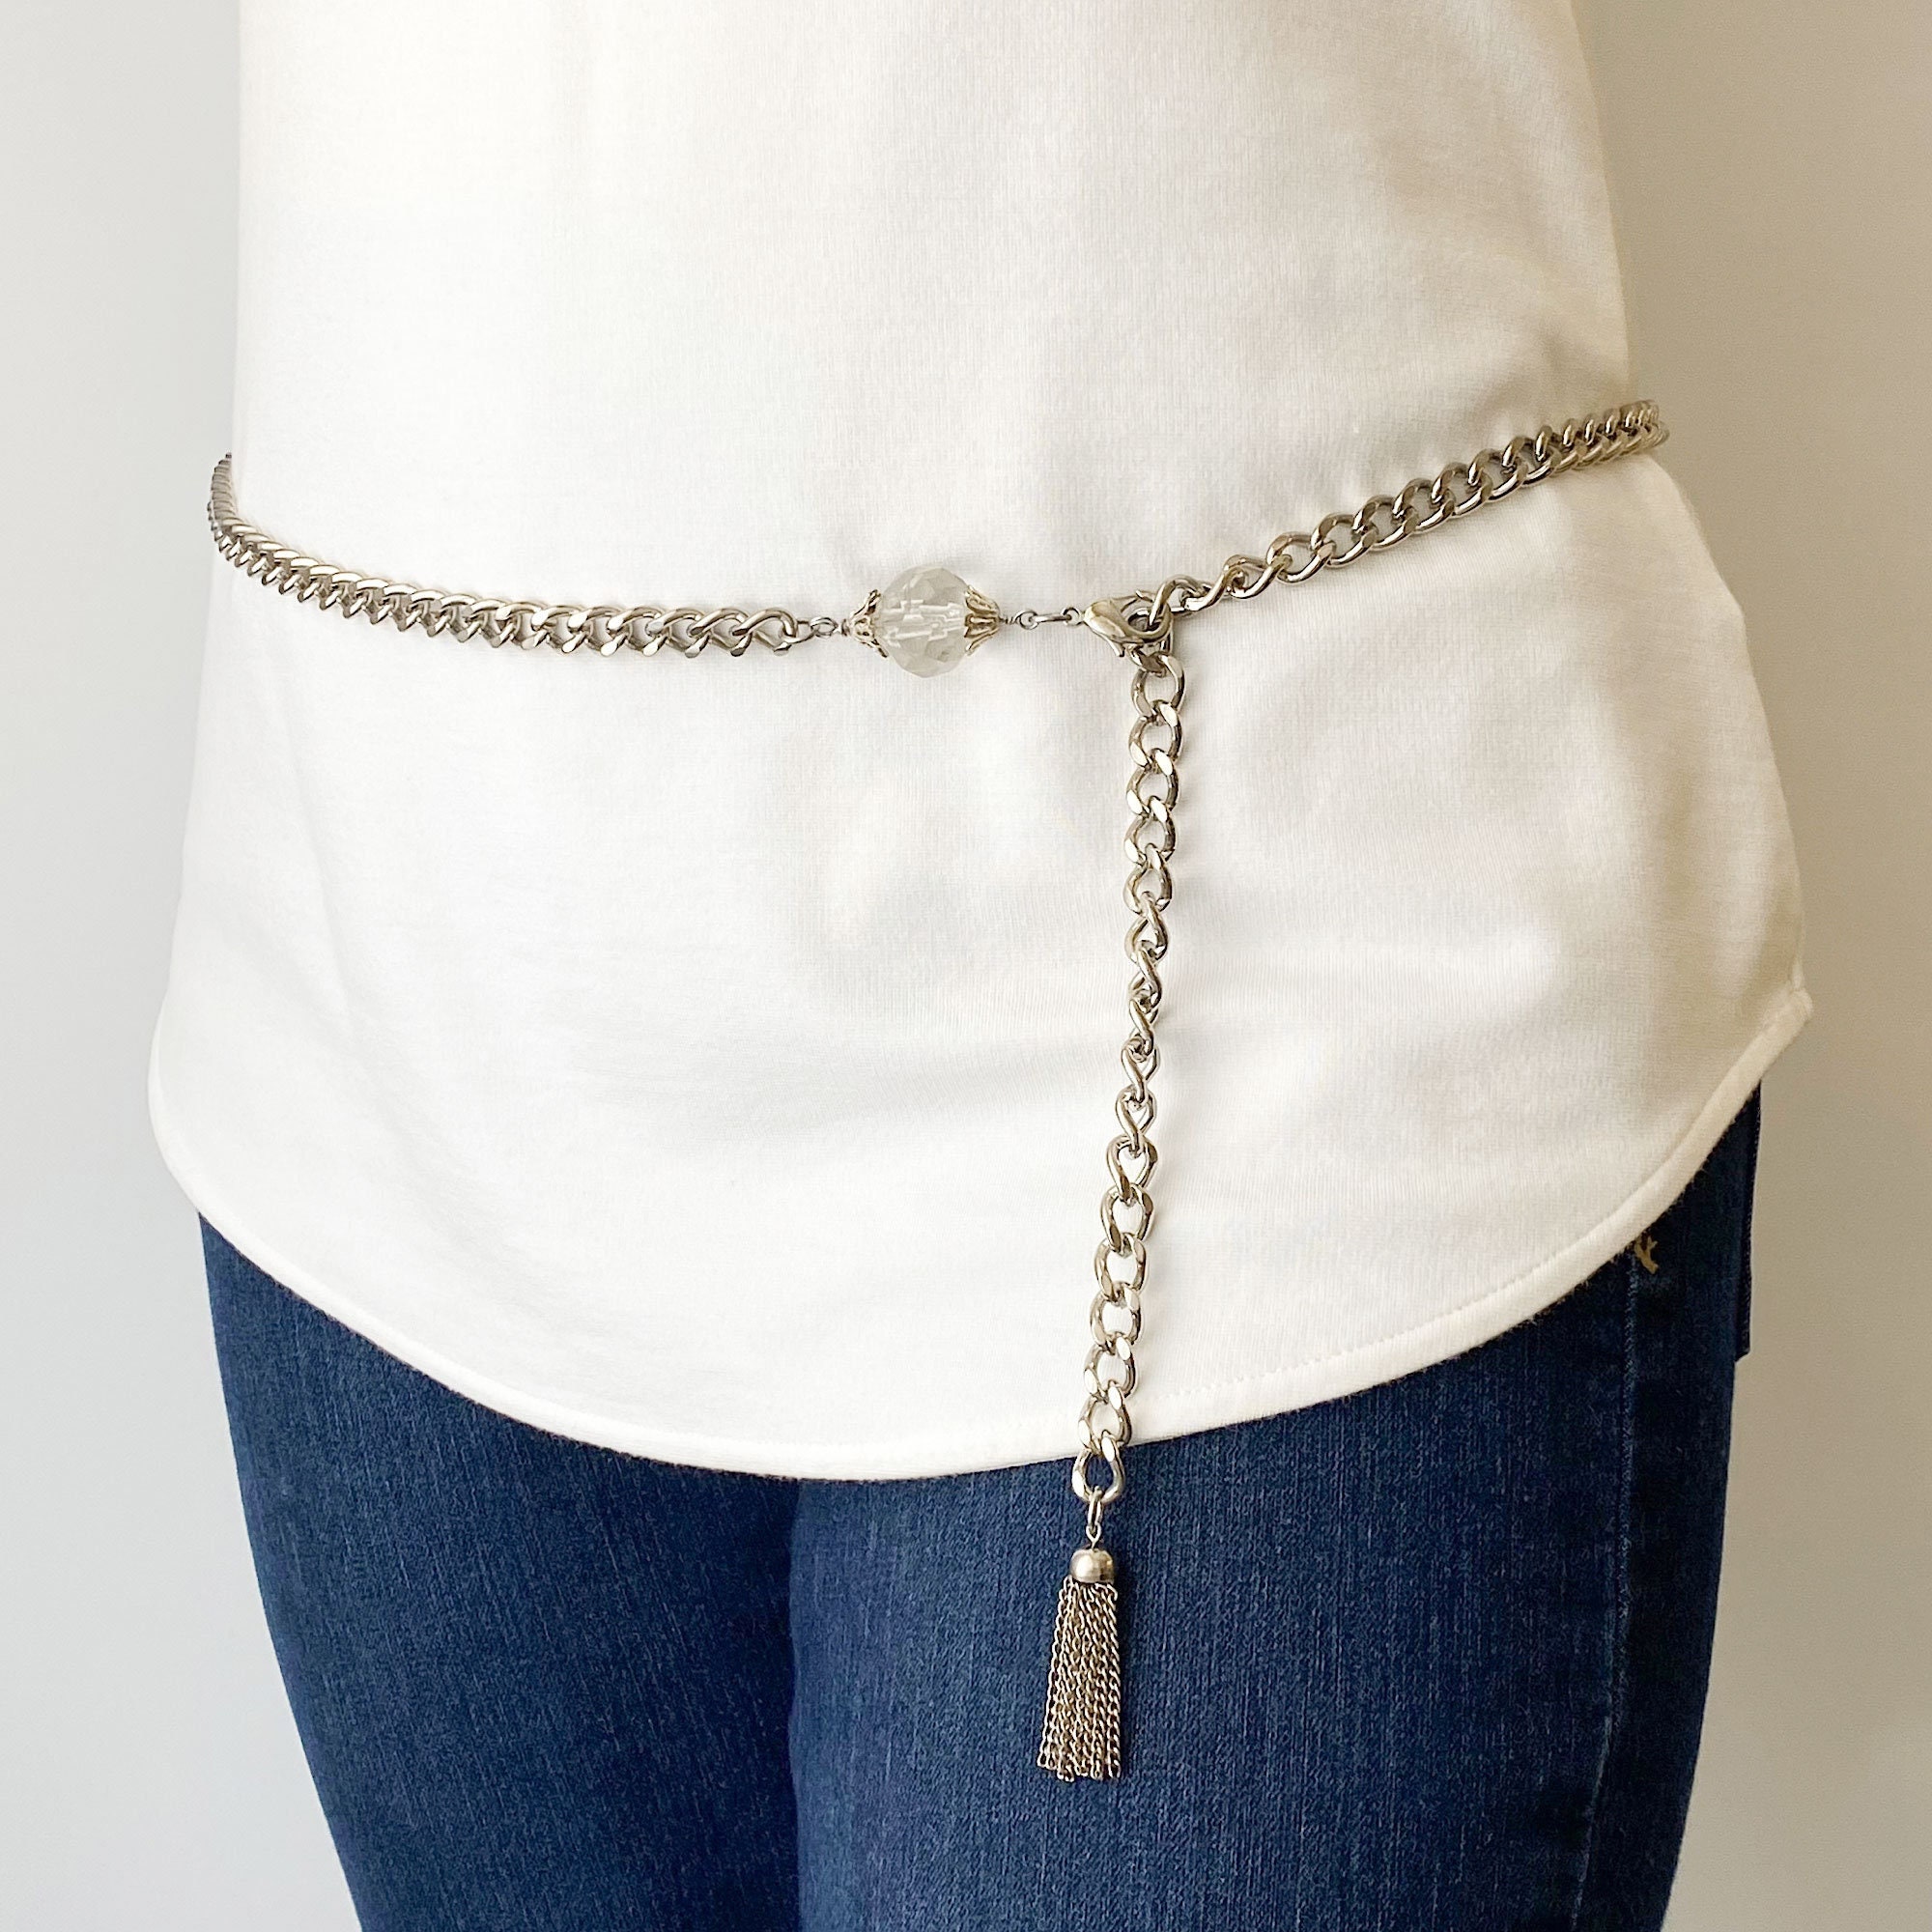 Jean Chain With Double Venus Symbol Charms Chain Belt, Pants Chain, Wallet  Chain With Three Double Female Pride Symbols. Lesbian Sapphic -  Norway